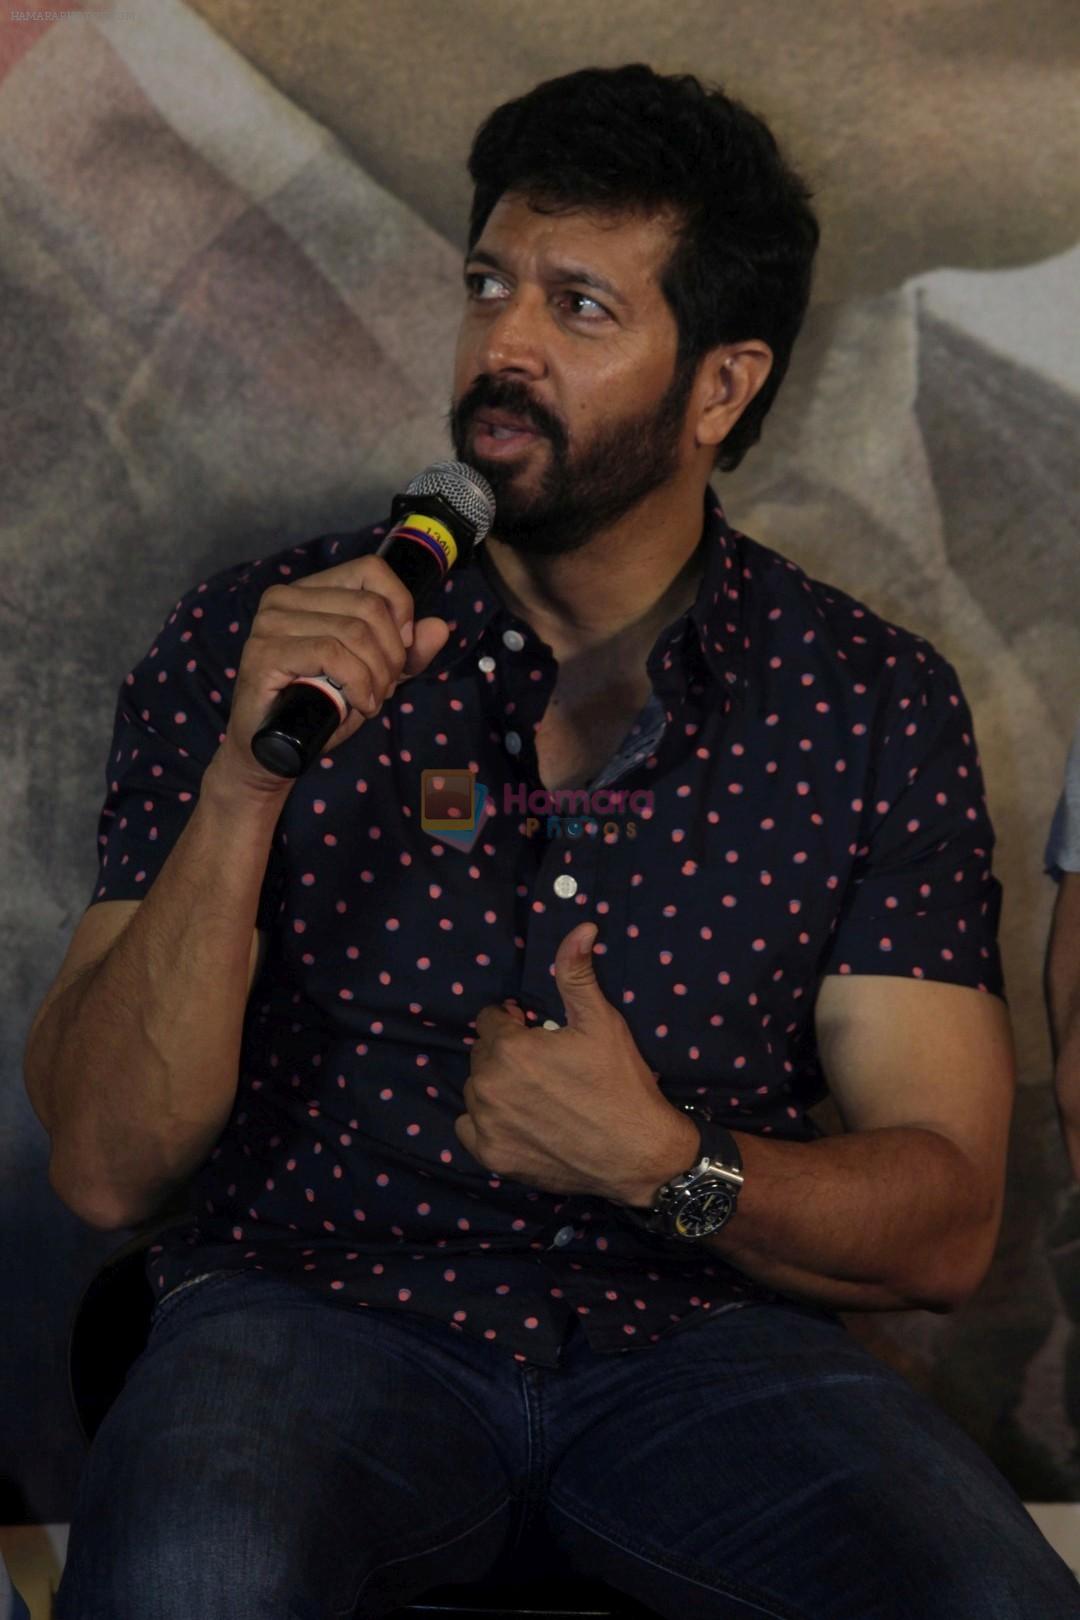 Kabir Khan at the Trailer Launch Of Film Tubelight on 25th May 2017